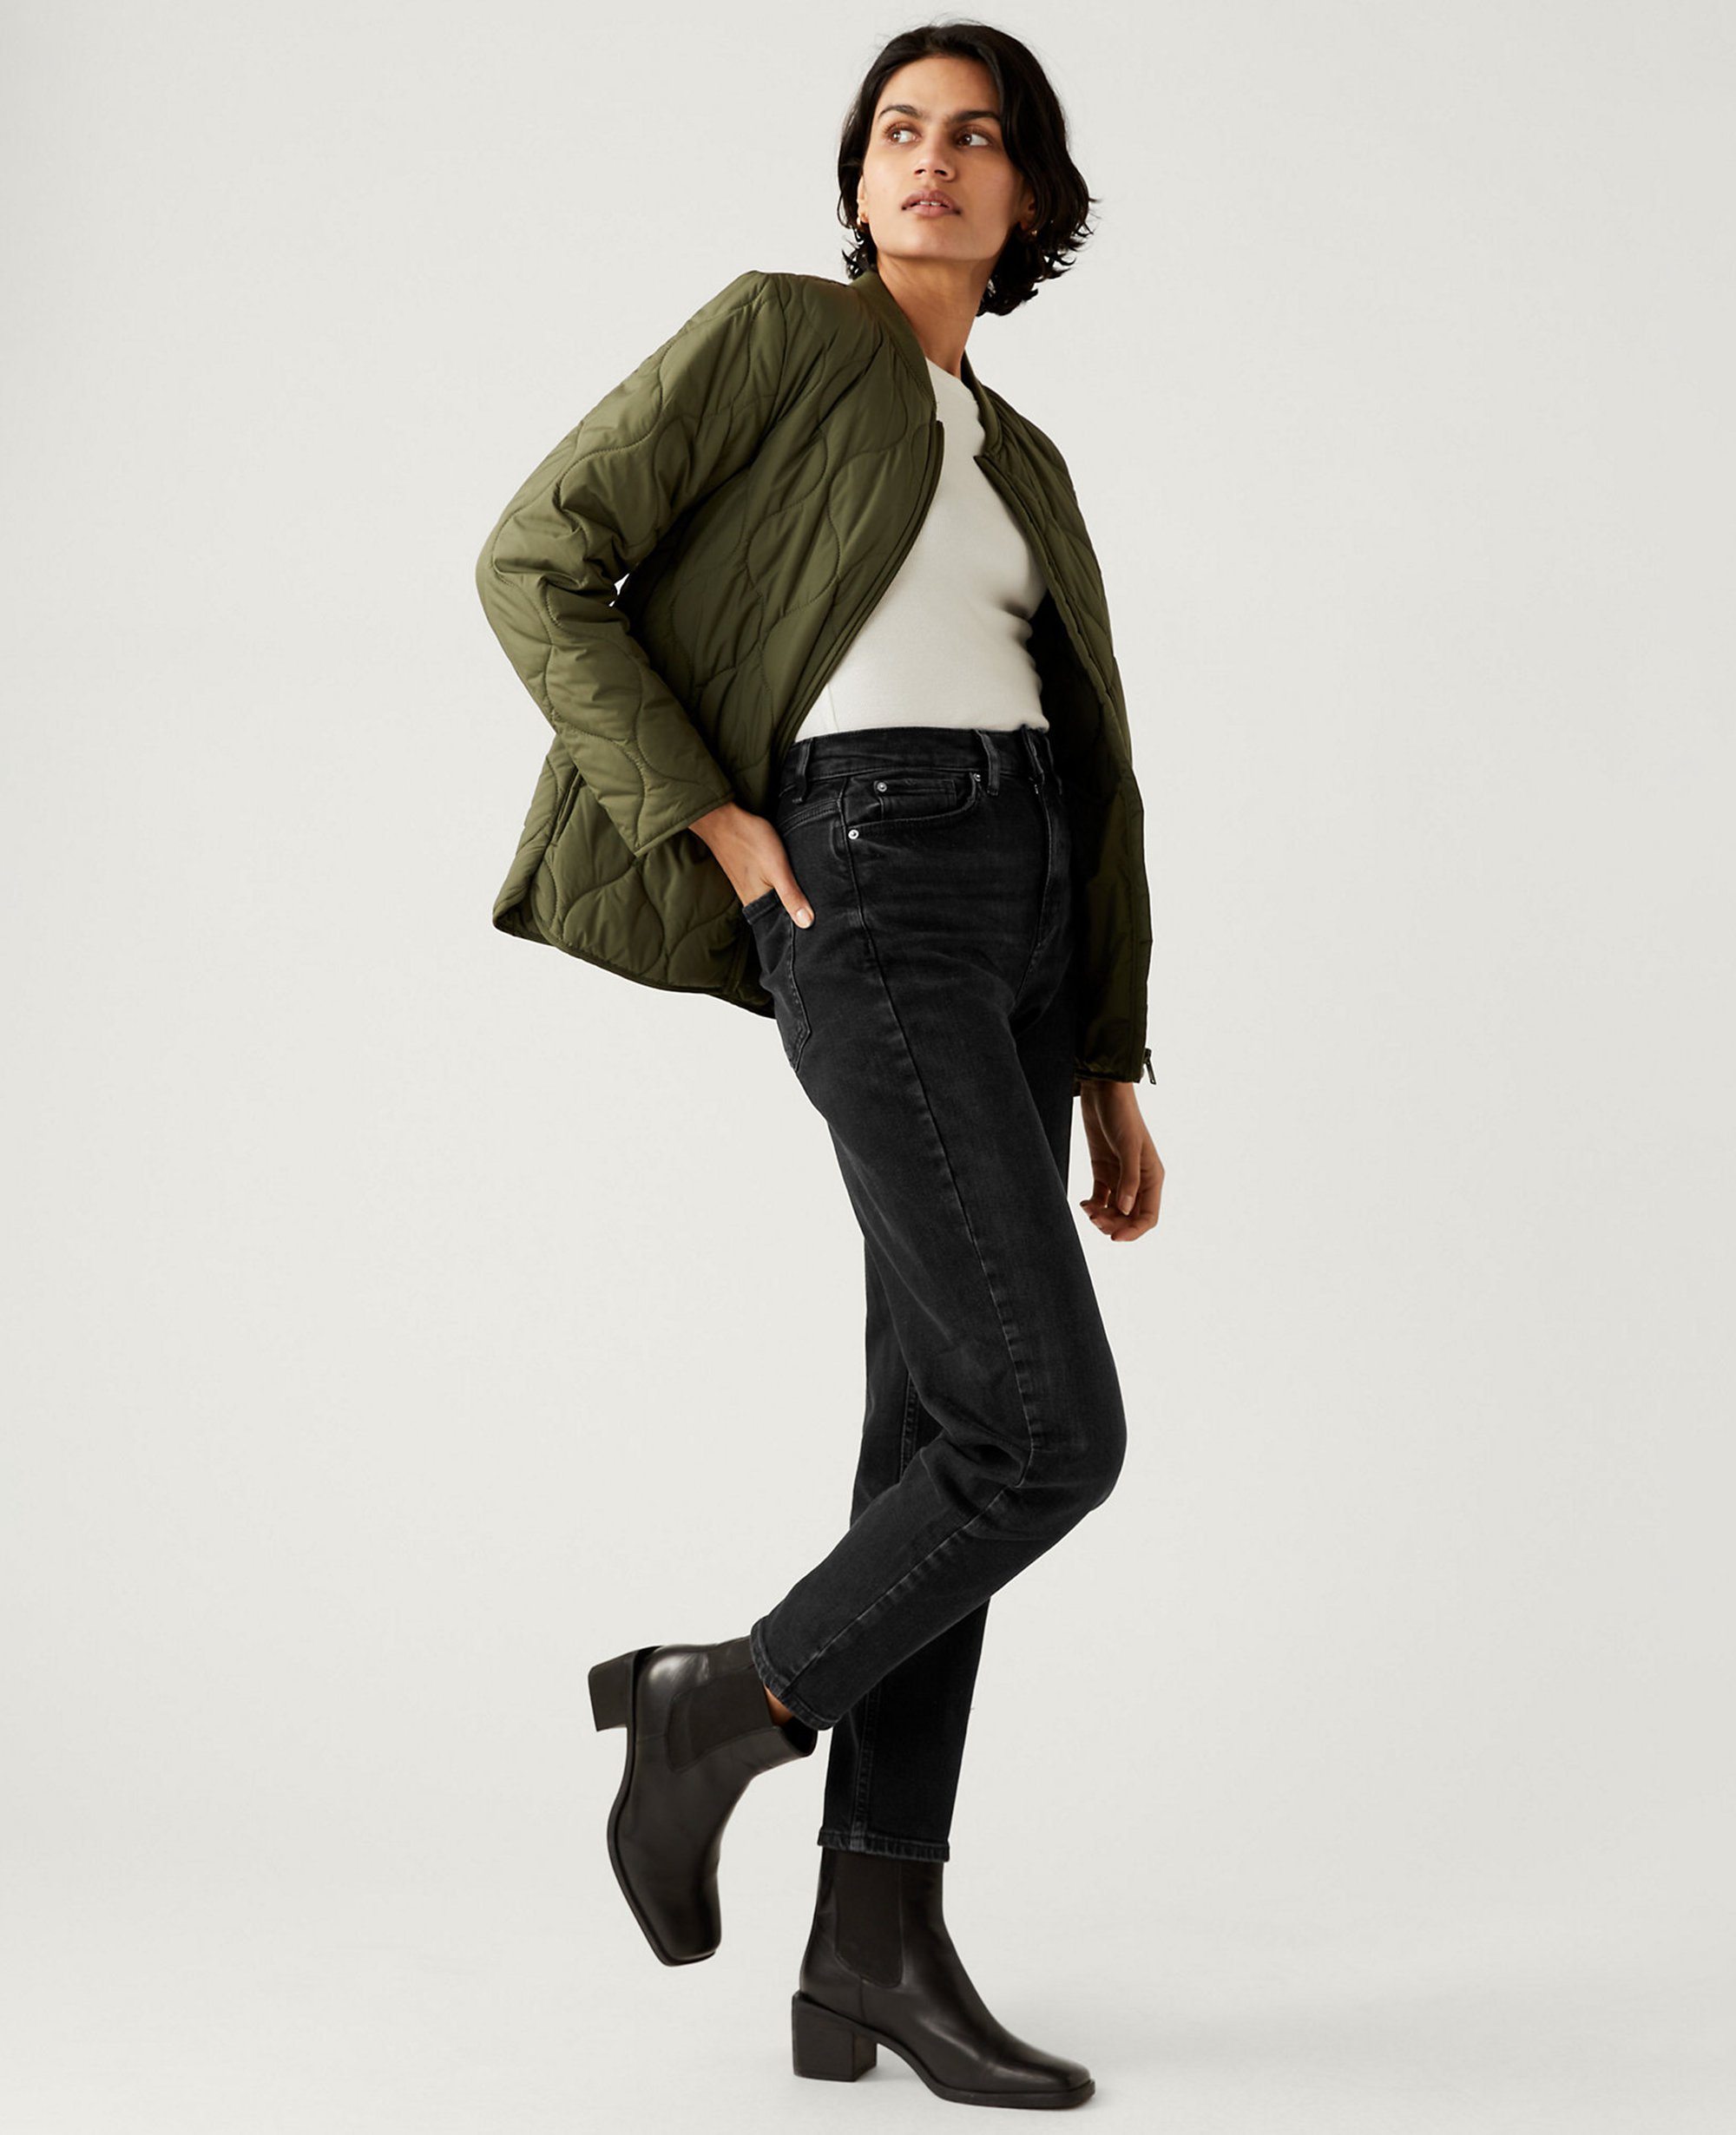 Best mom jeans 2022: Top rated pairs from M&S, Levi's, ASOS & more